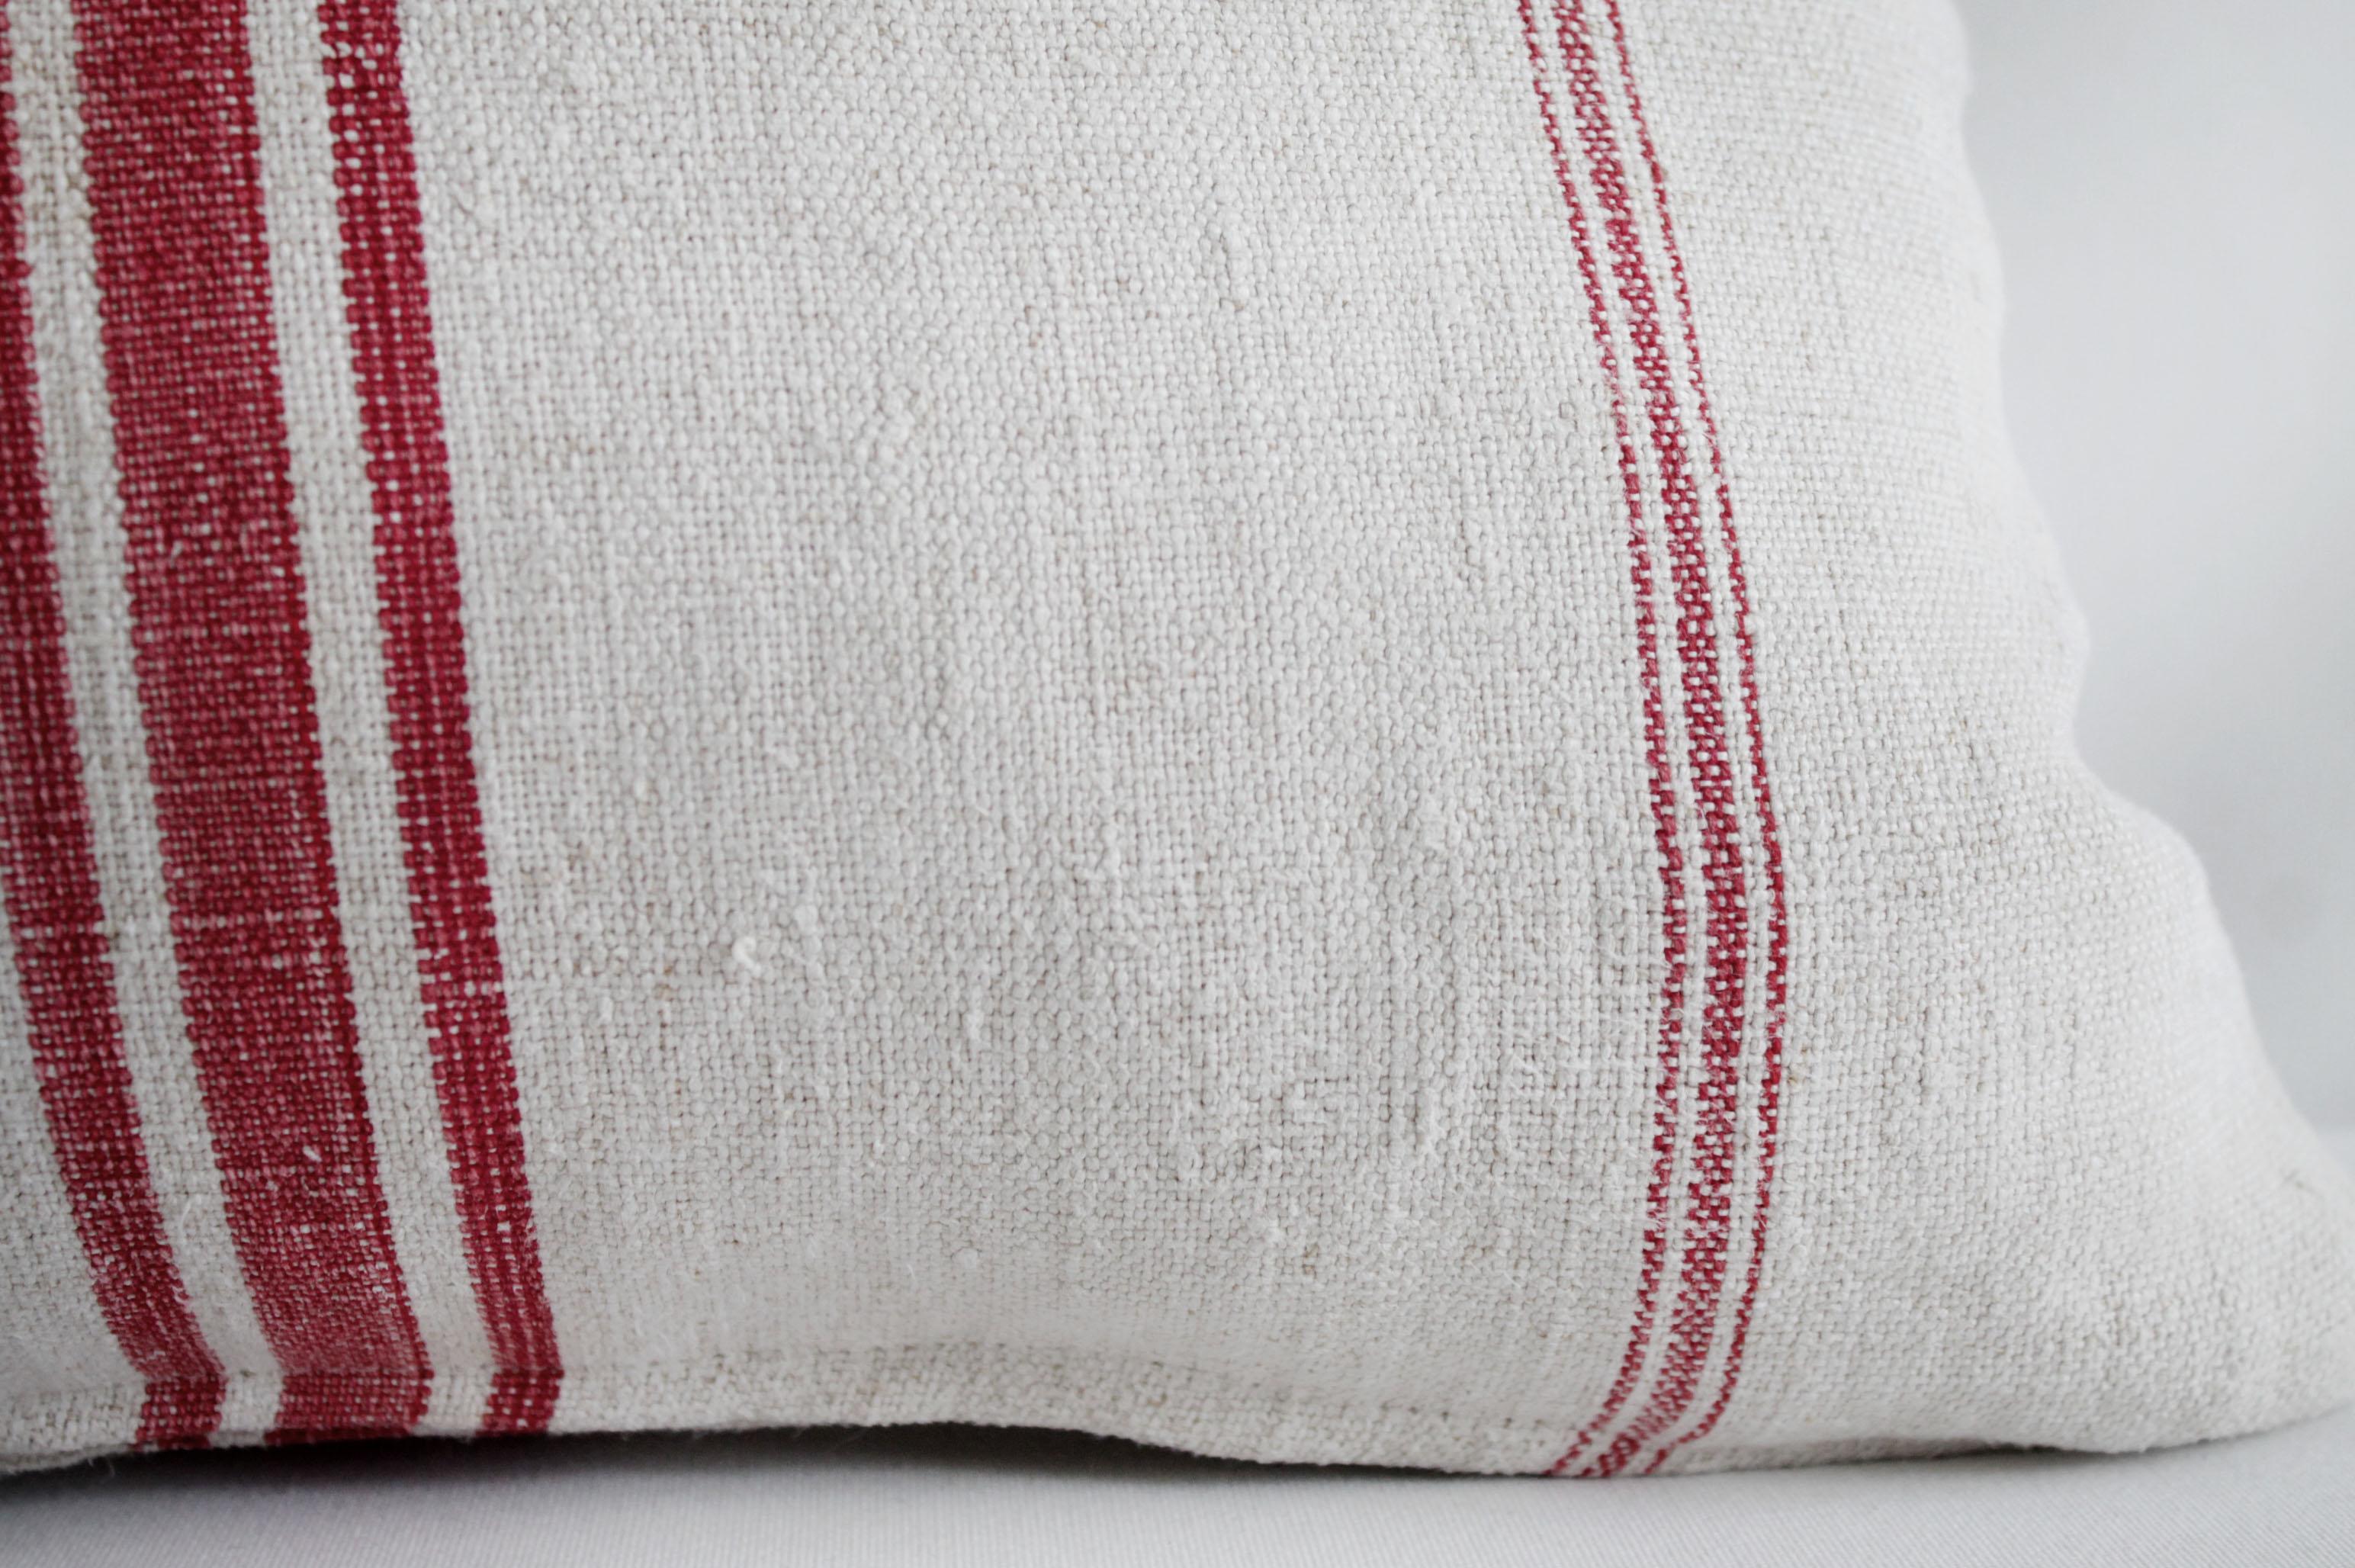 20th Century Vintage Linen Grain Sack Pillow with Red Stripes